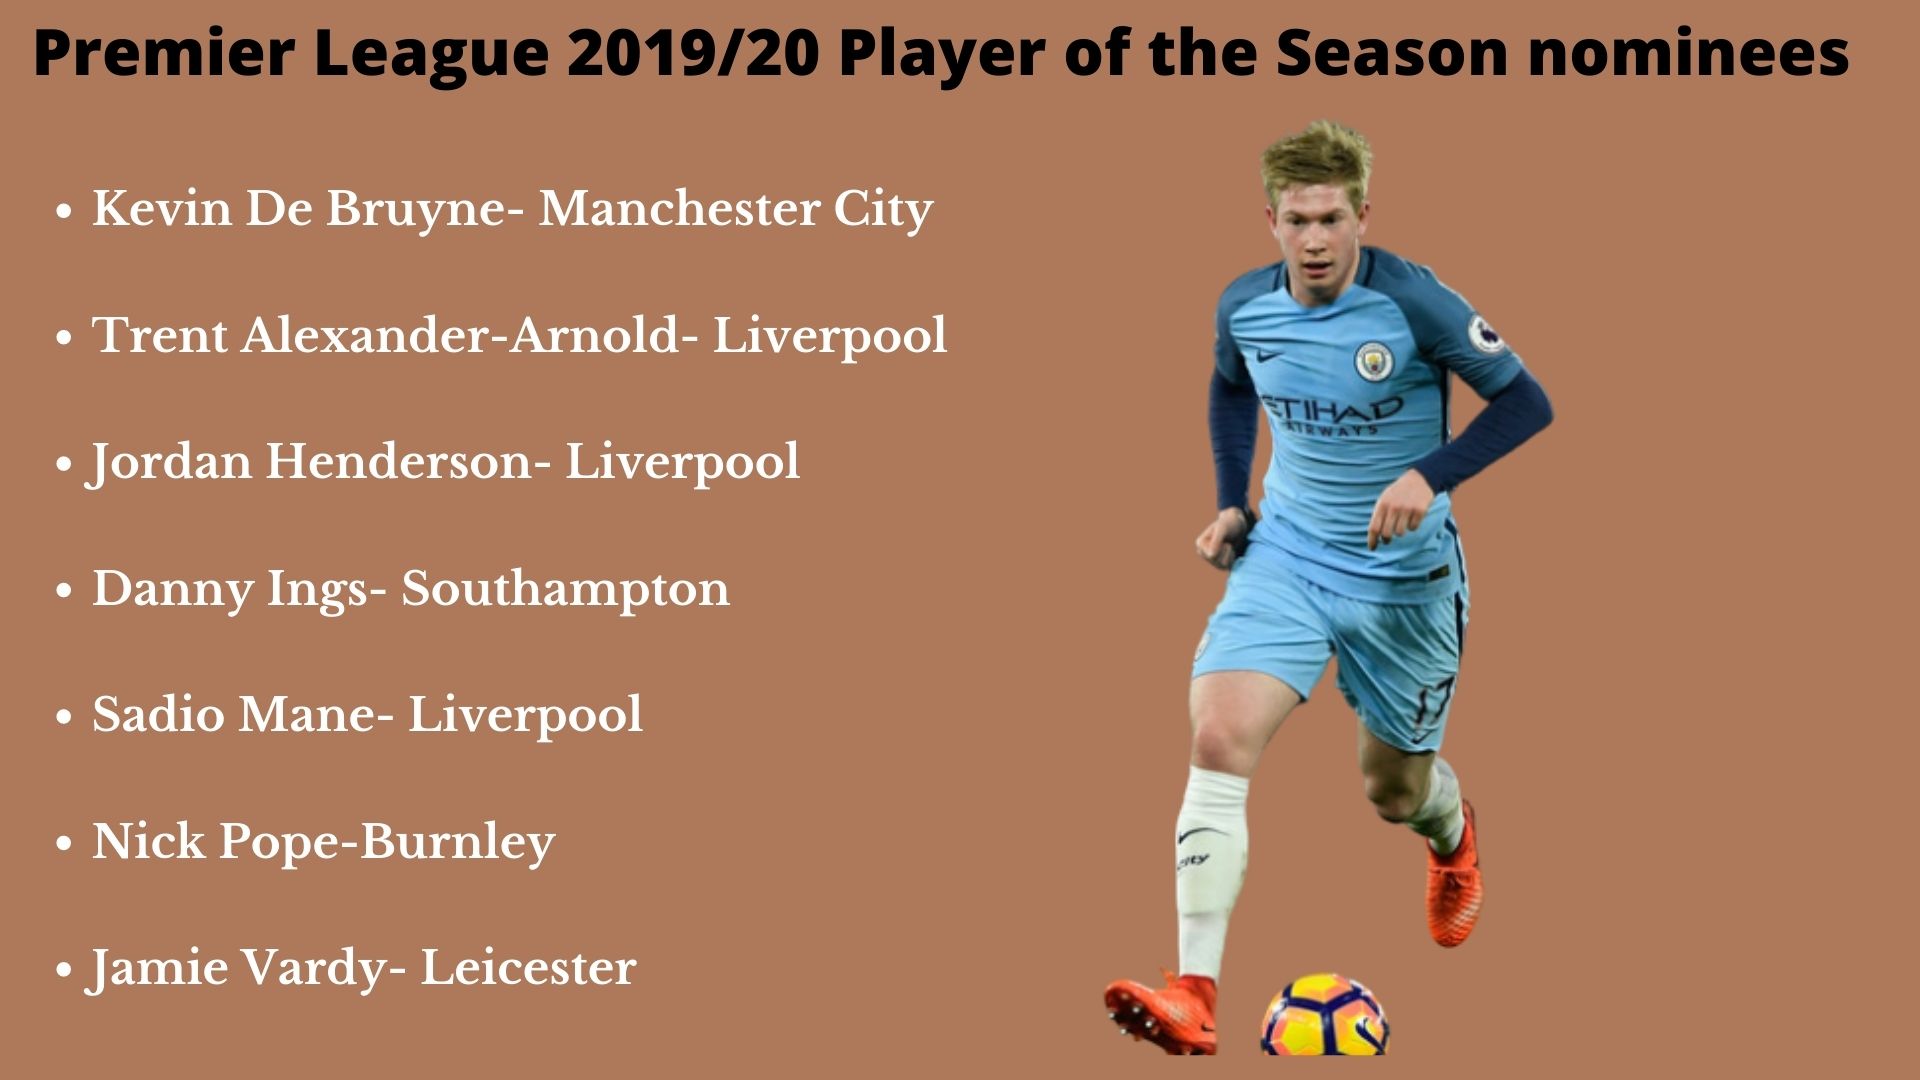 Kevin De Bruyne named Premier League's Player of the Season.